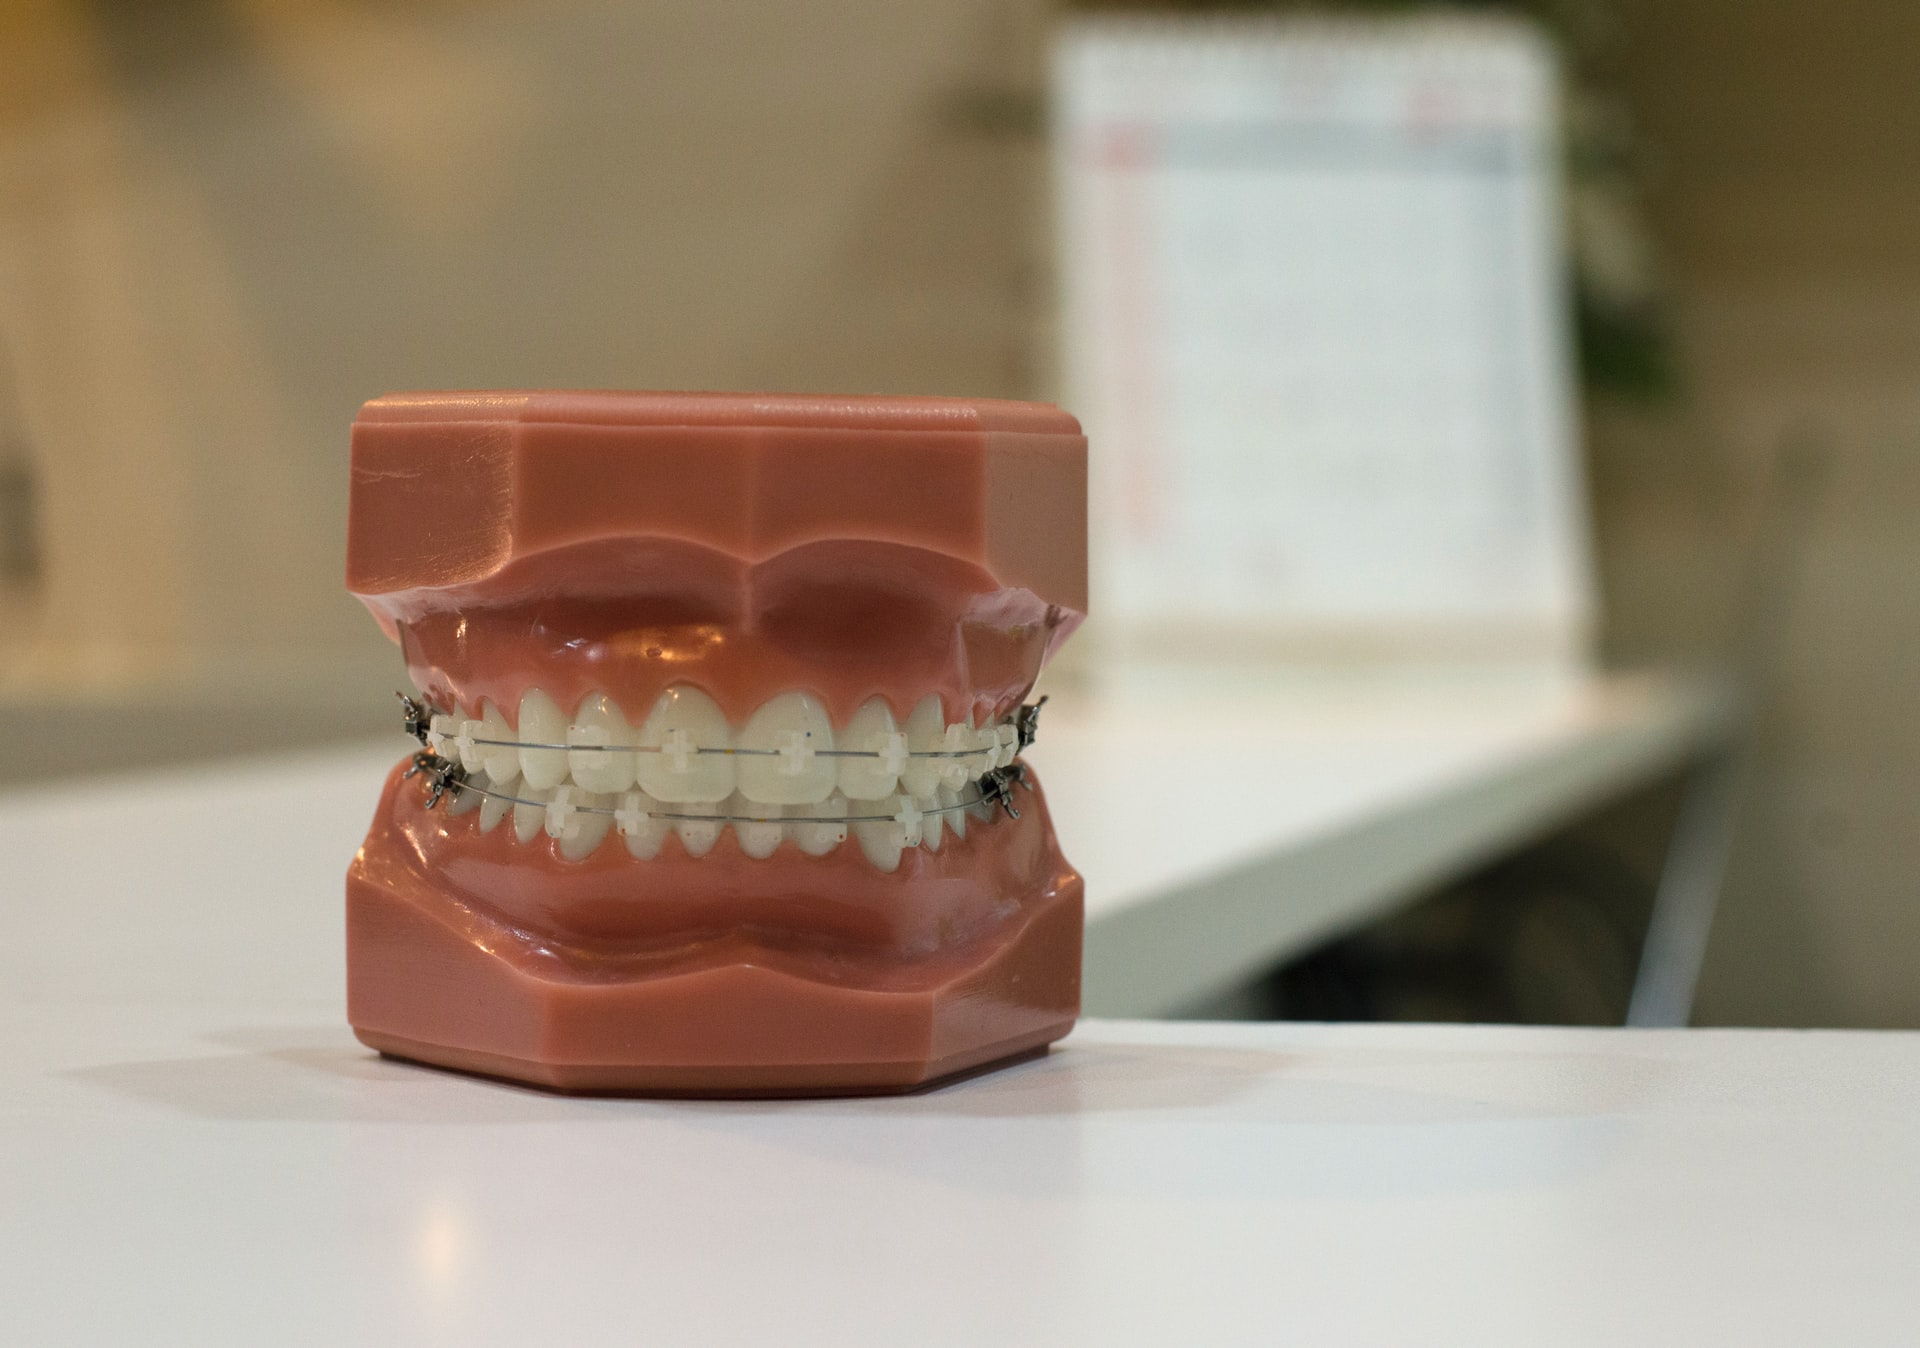 Invisalign vs. Braces: Which Is Faster?